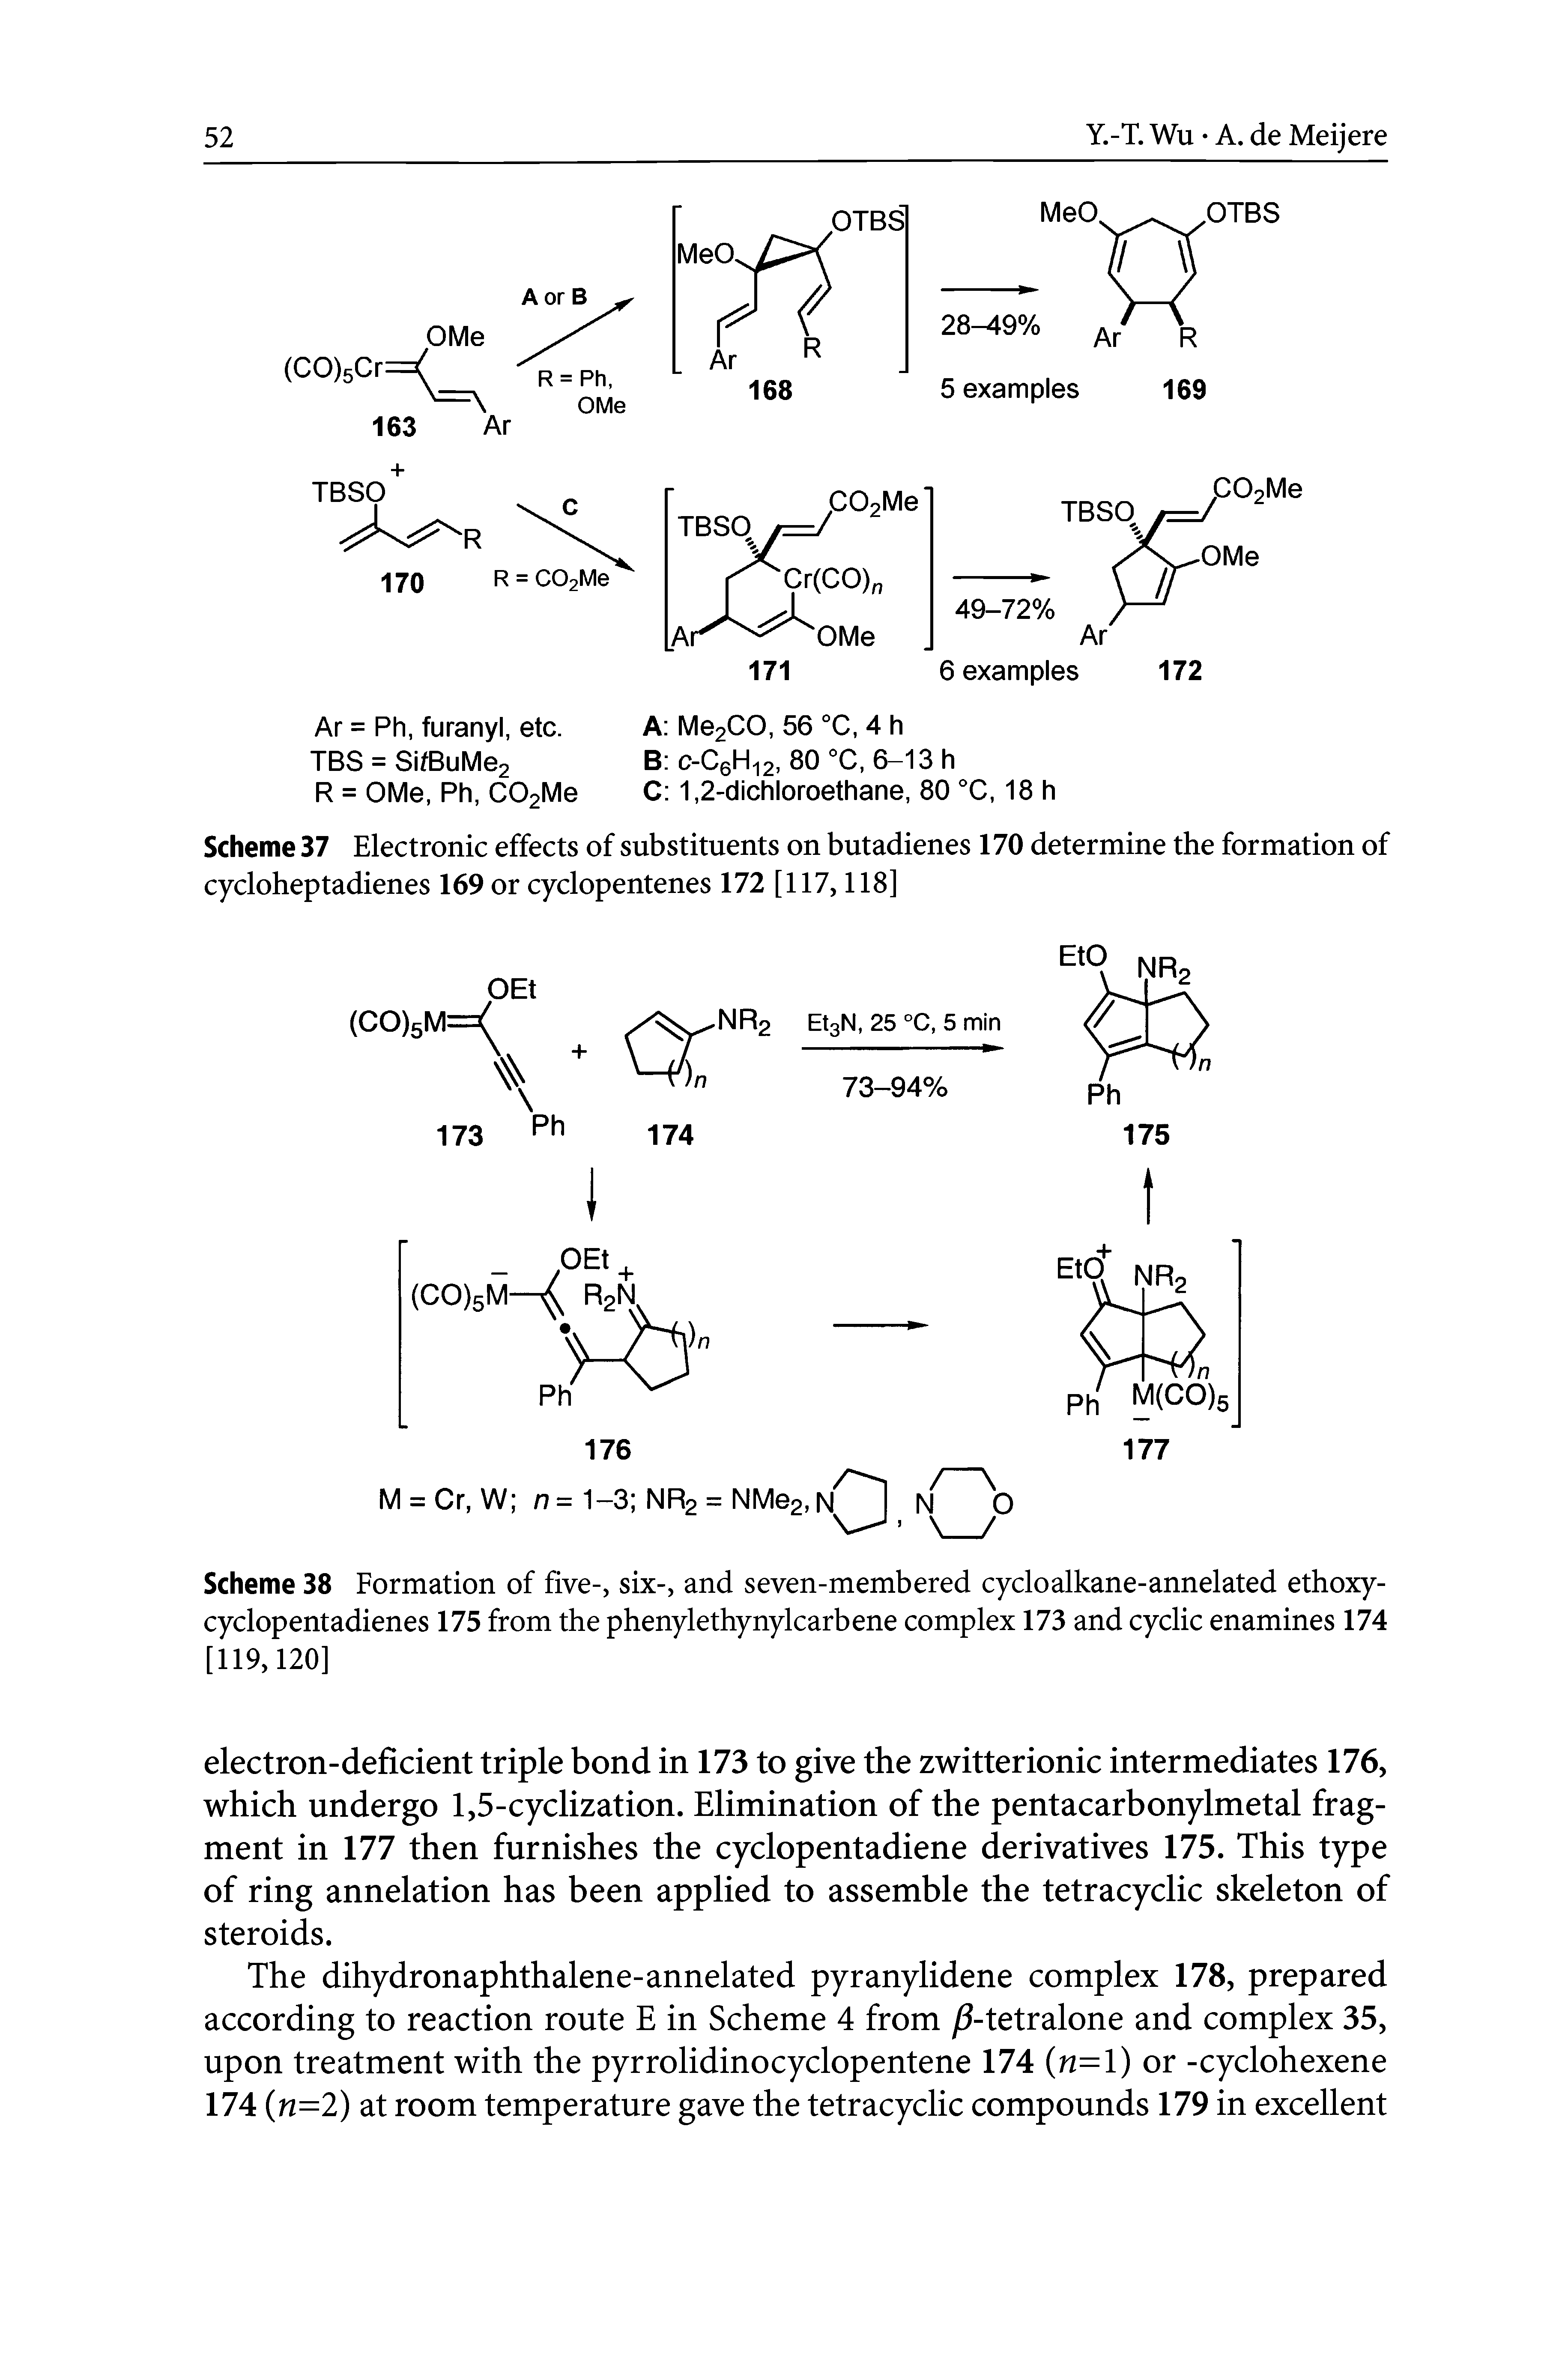 Scheme 38 Formation of five-, six-, and seven-membered cycloalkane-annelated ethoxy-cyclopentadienes 175 from the phenylethynylcarbene complex 173 and cyclic enamines 174 [119,120]...